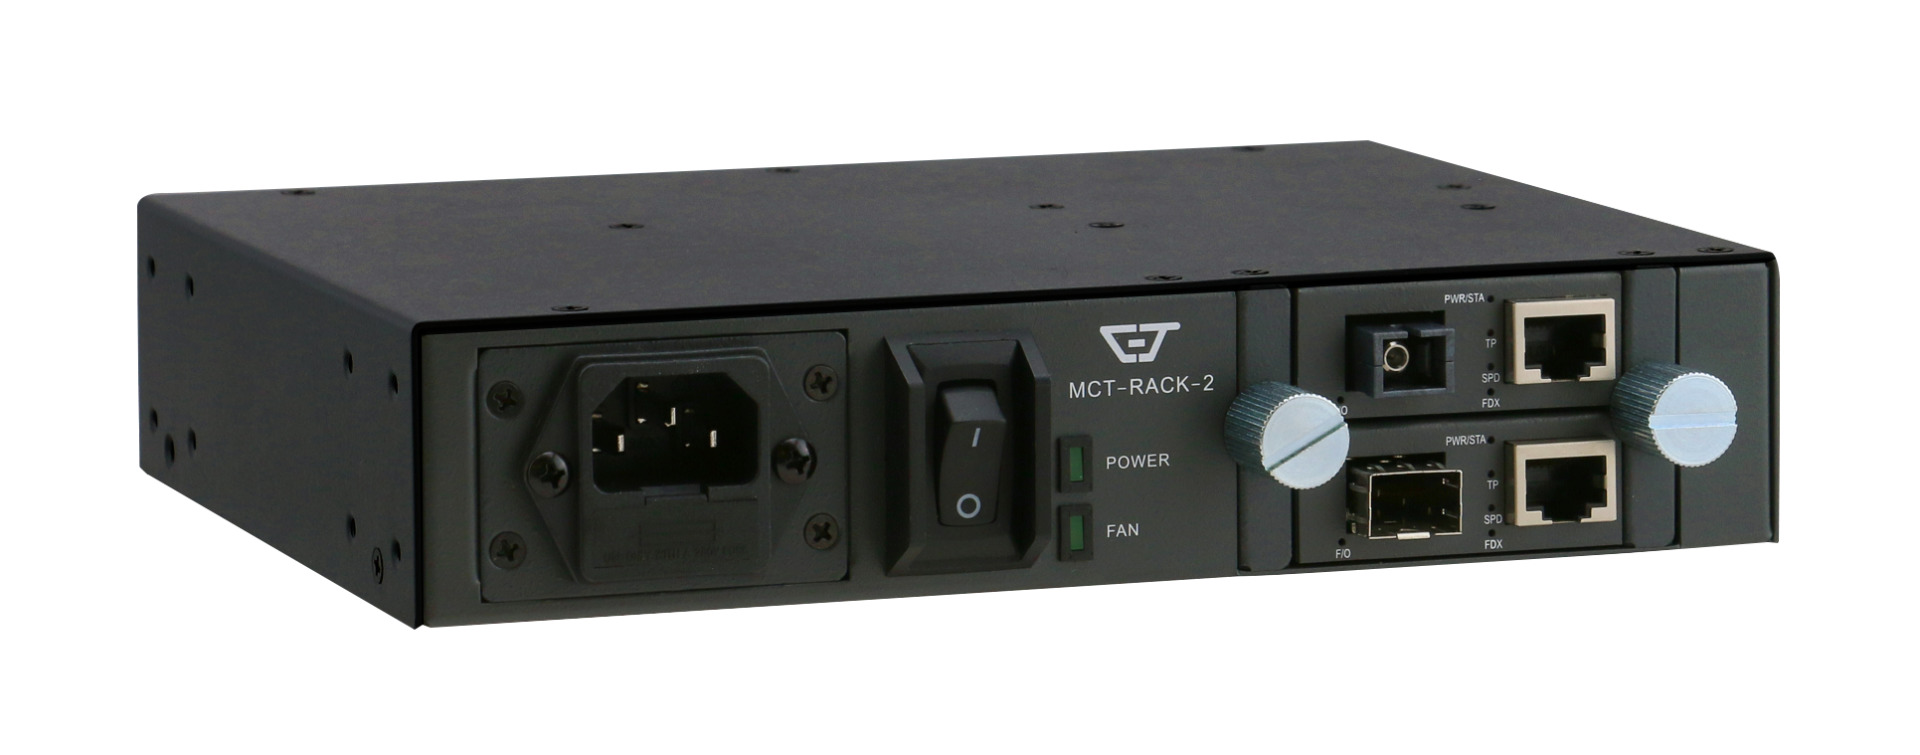 CTS 10" Rack Chassis for MCT Converter, 2 Slots, Unmanaged